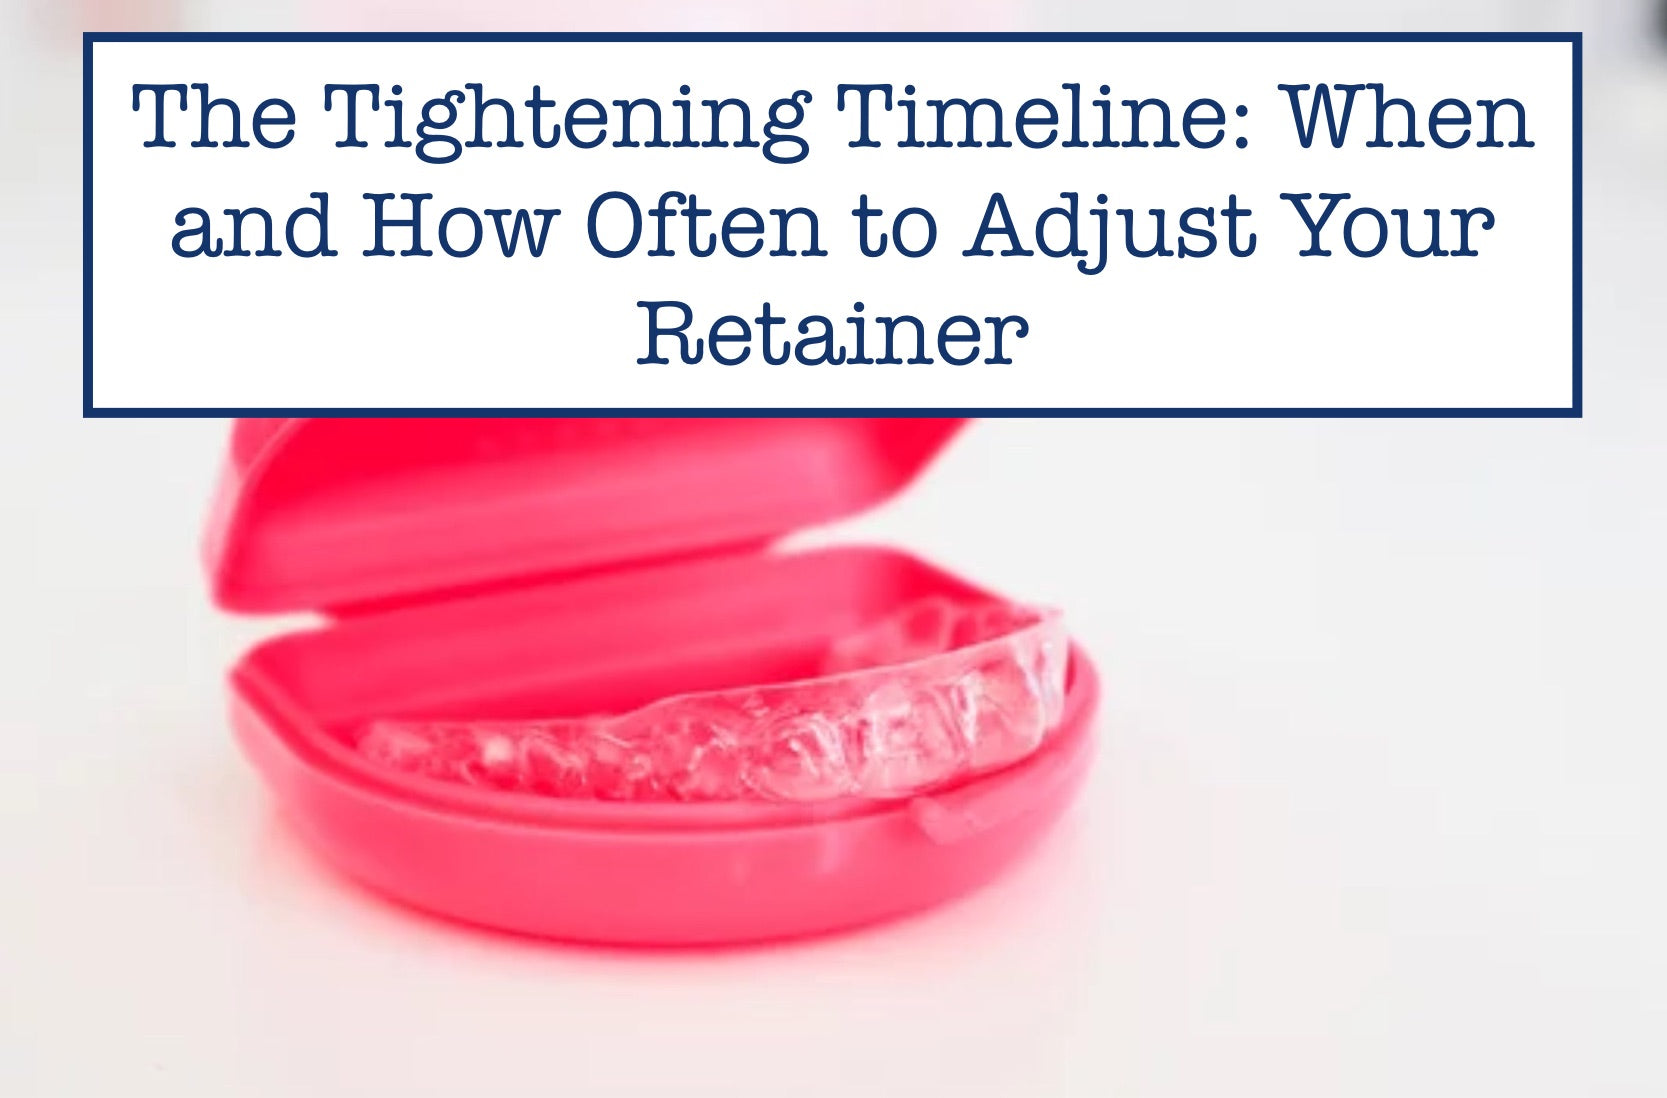 The Tightening Timeline: When and How Often to Adjust Your Retainer